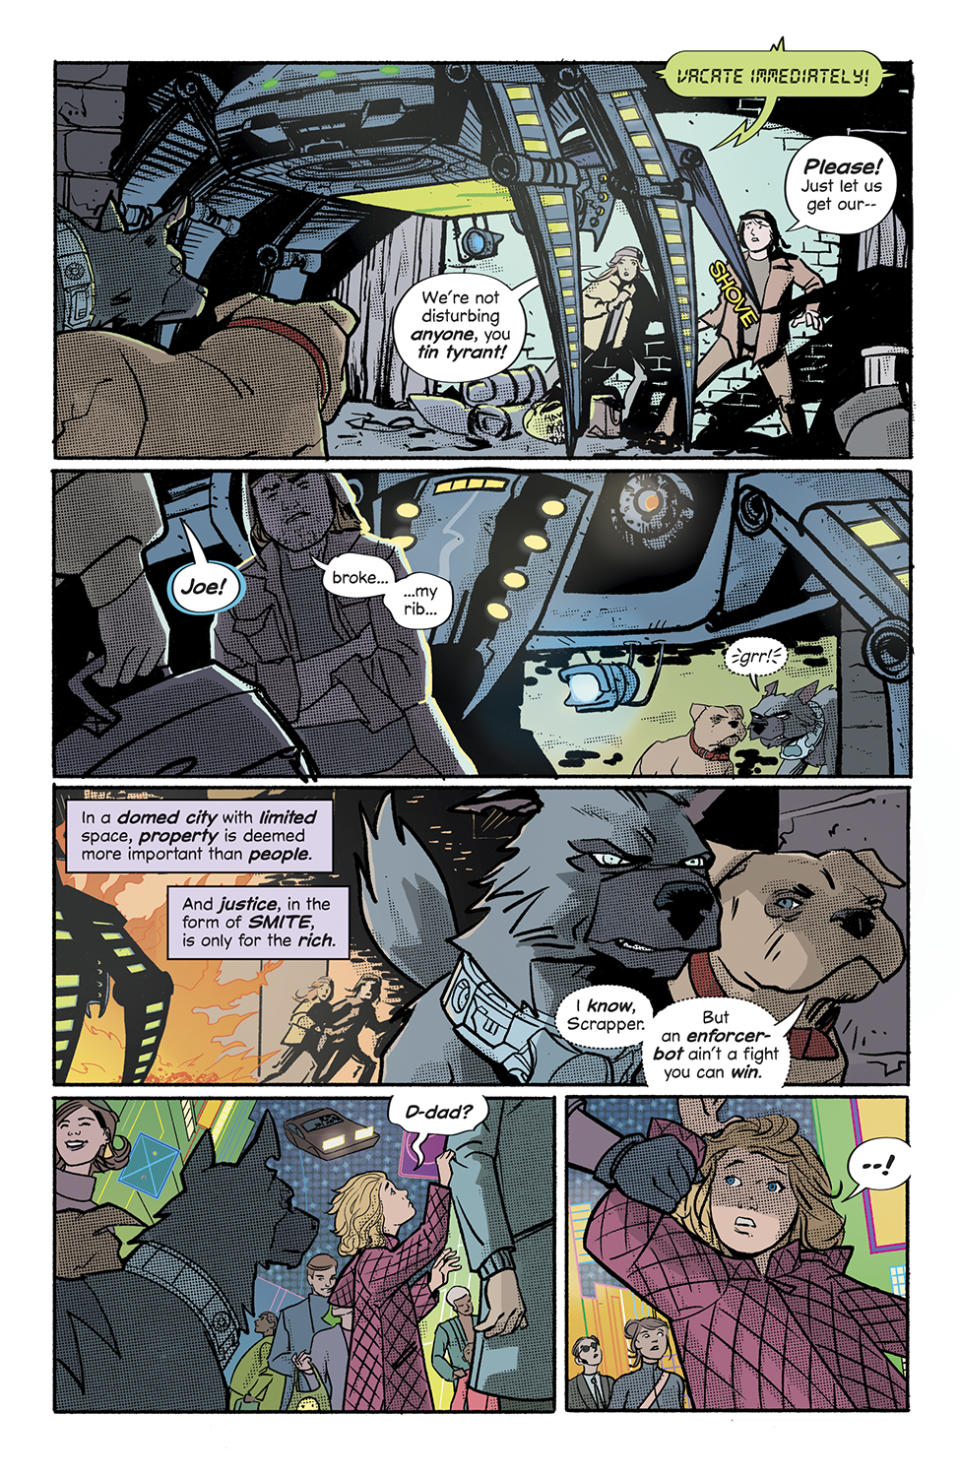 Scrapper interior pages: dogs look at a robot spider.